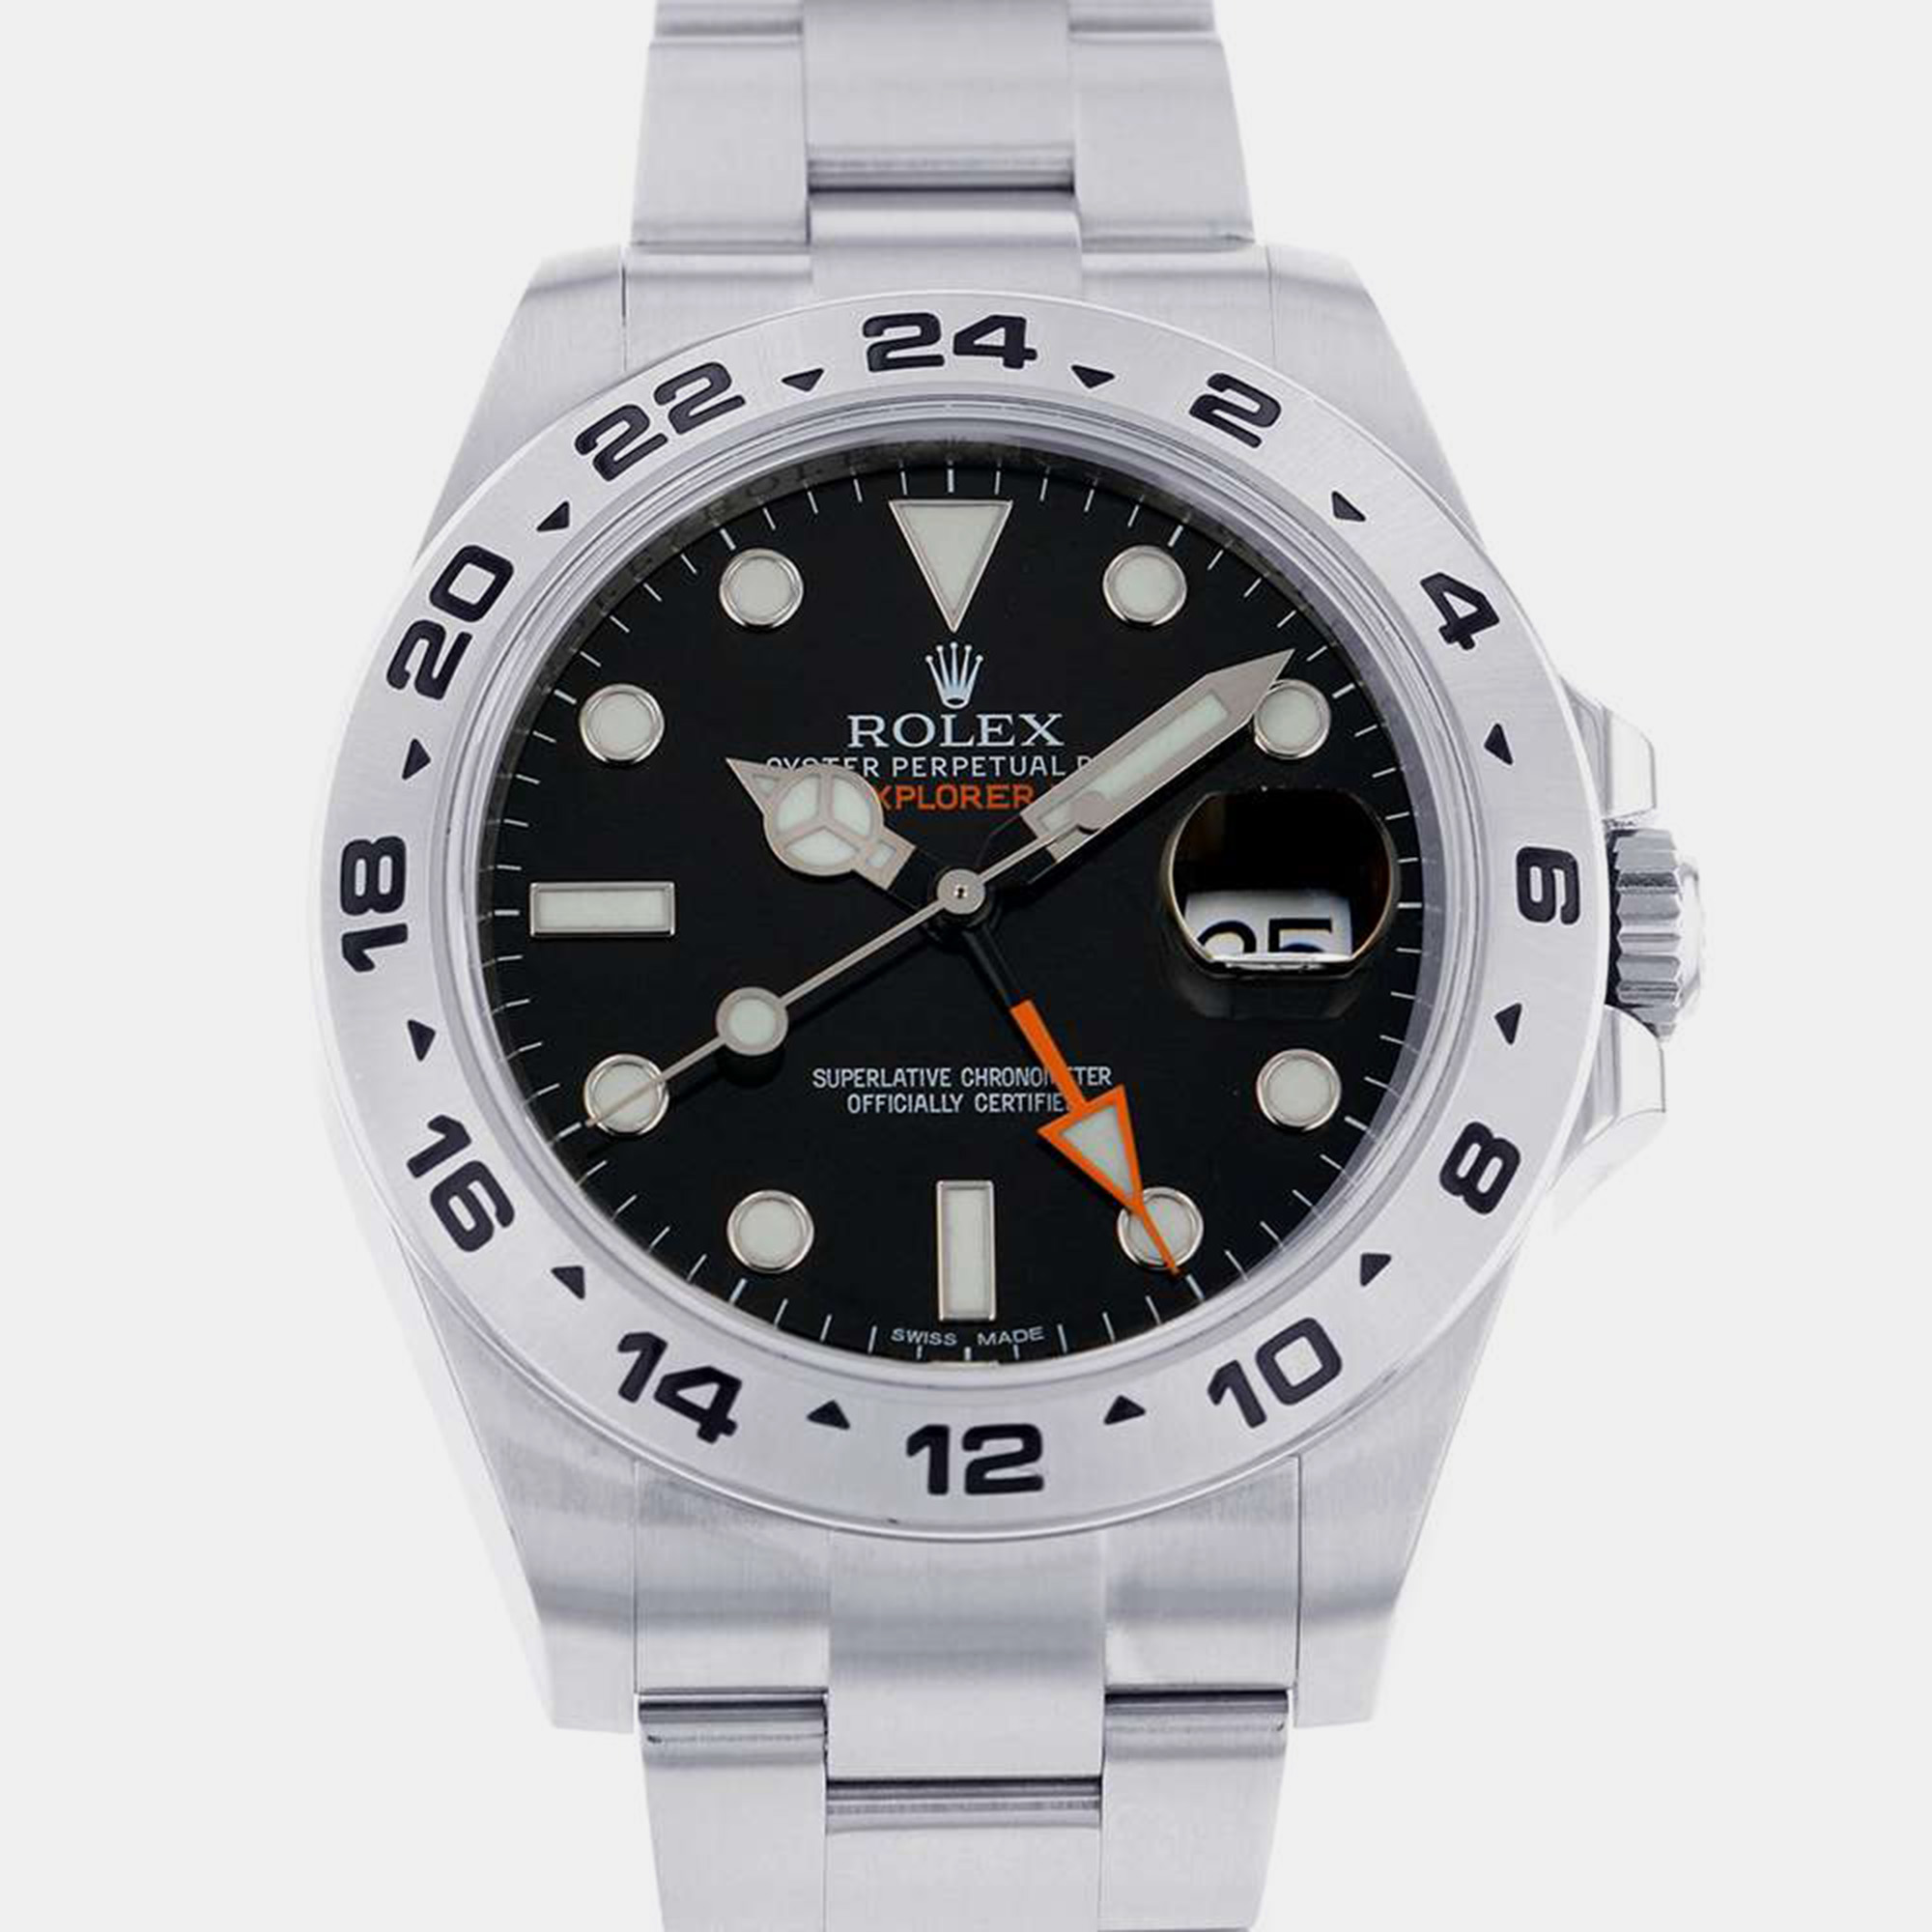 Embrace the legacy of timekeeping perfection with an authentic Rolex timepiece. Meticulously crafted it radiates elegance and status boasting exceptional precision enduring style and the iconic Rolex legacy.